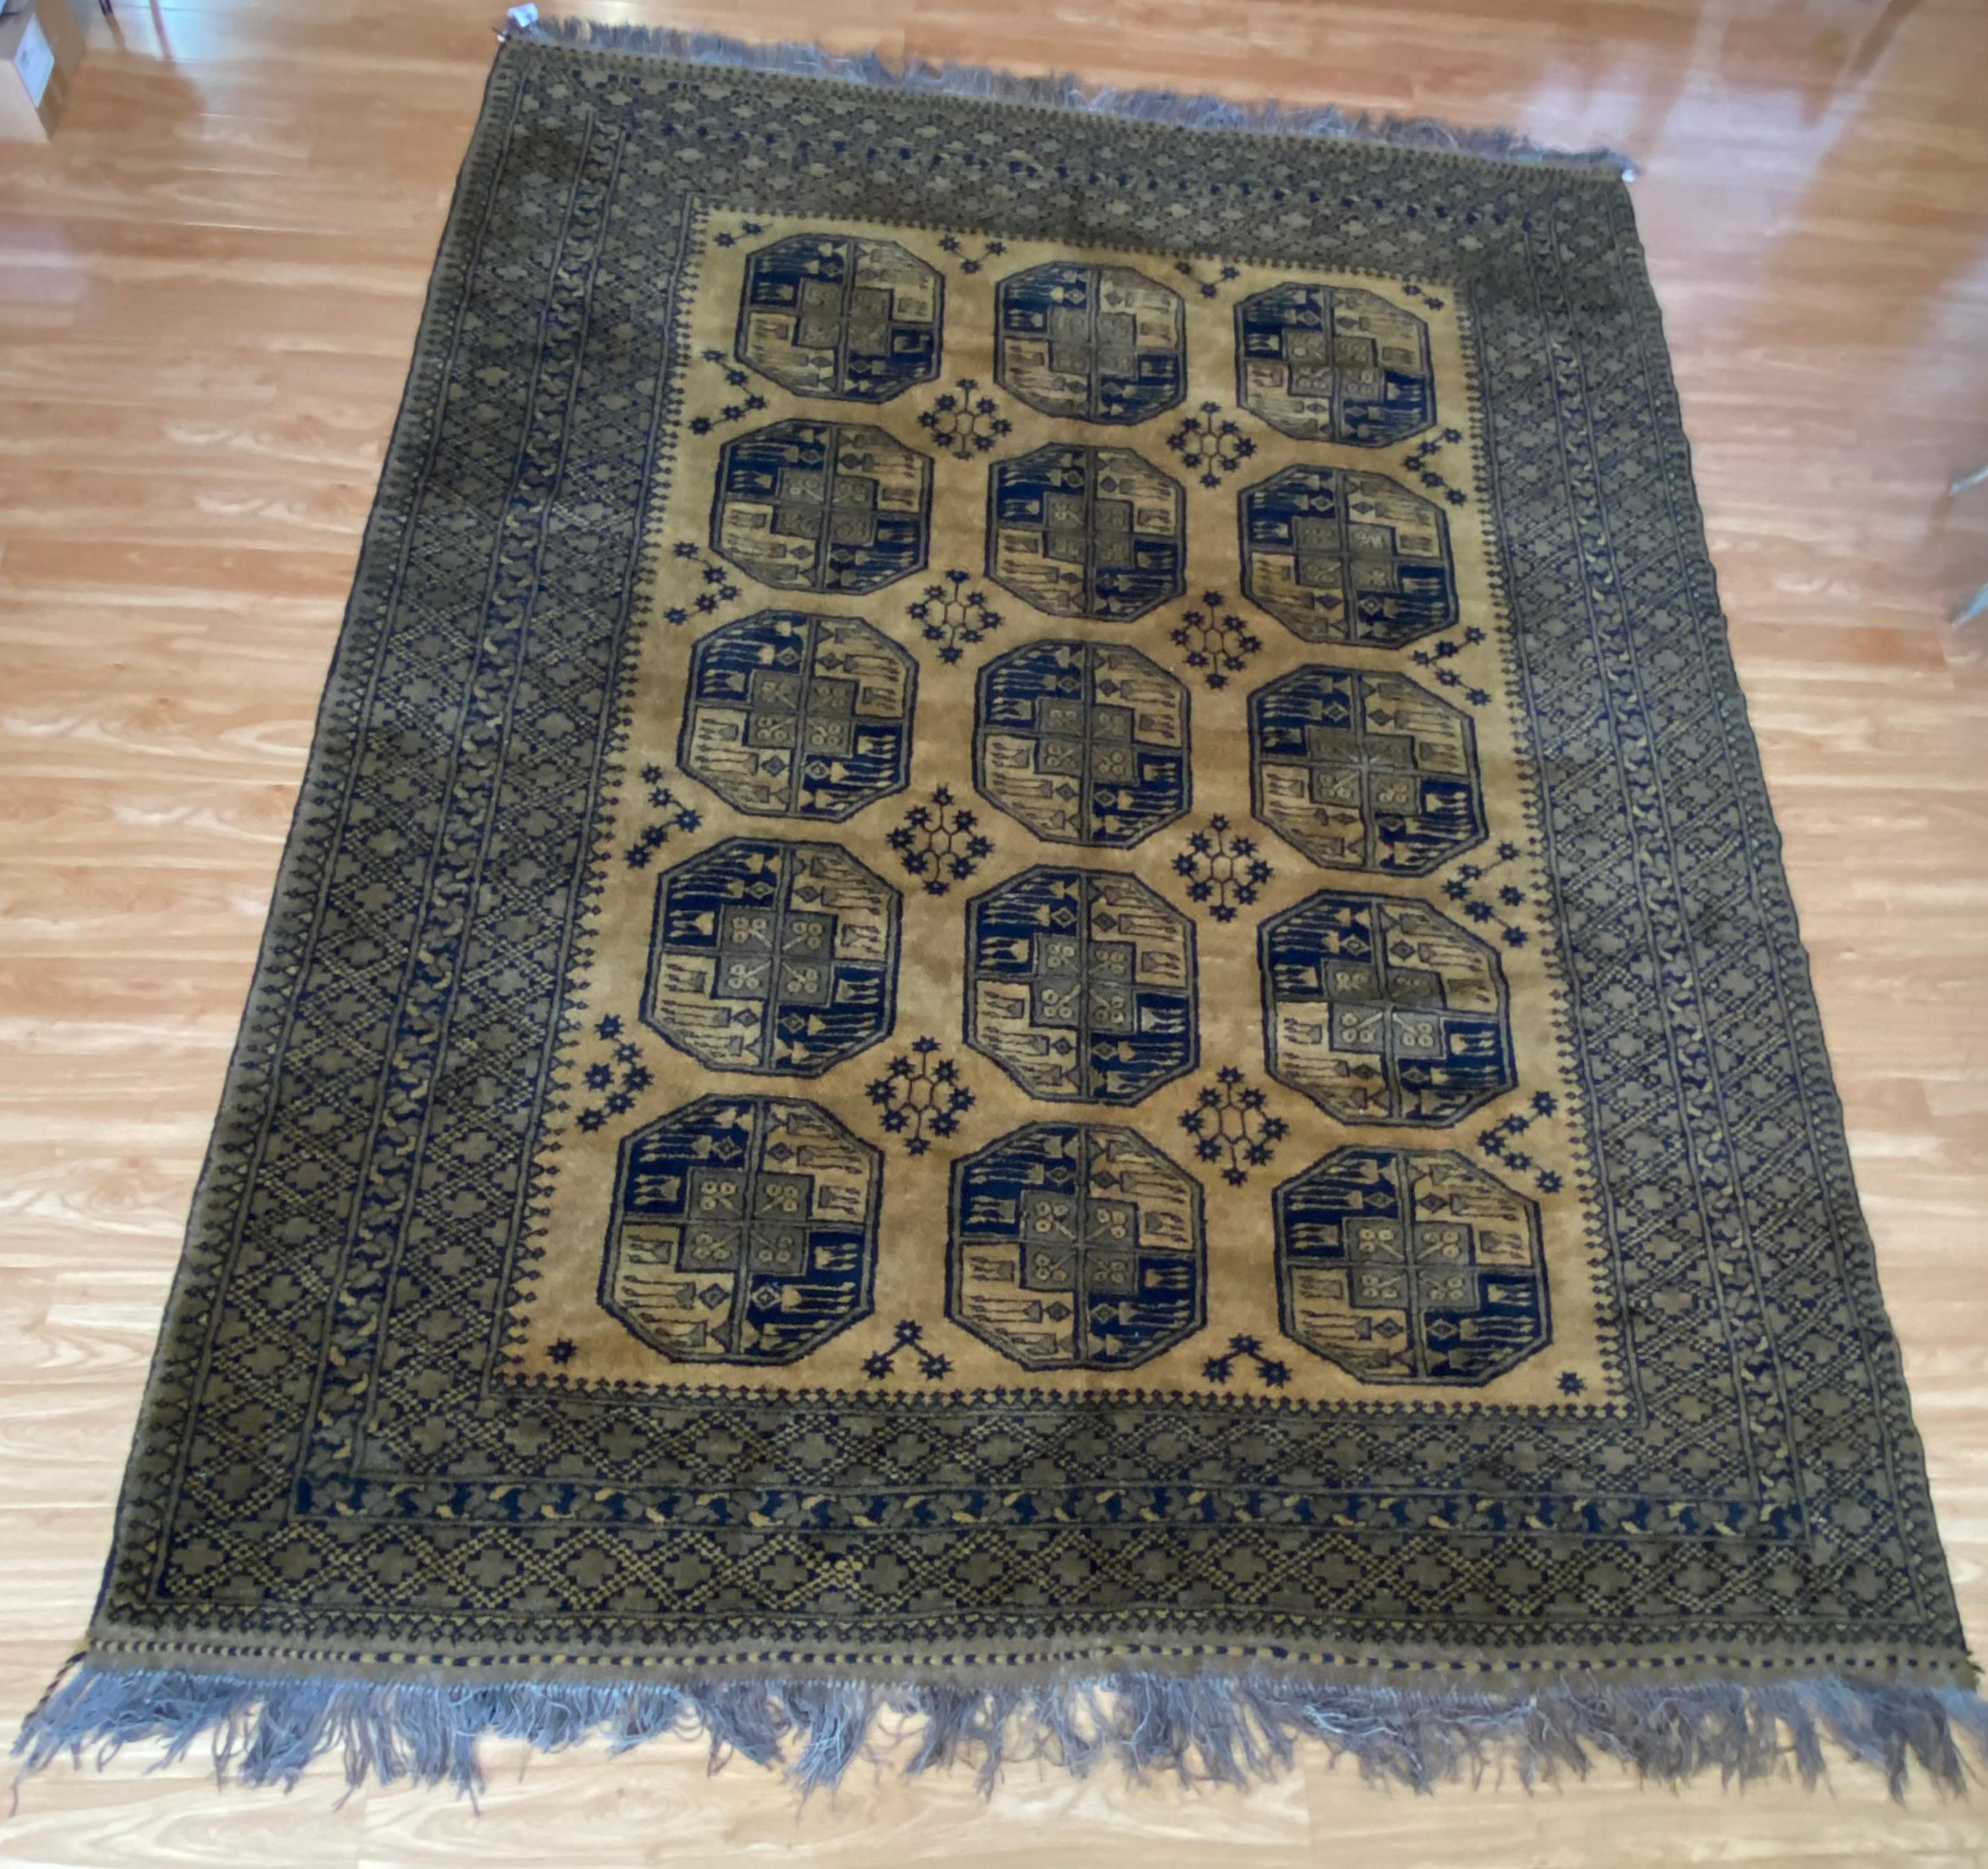 Early 20th century gold and black Bokara Afghan 10 x 8 rug.

Gorgeous rug approximately 50 - 80 years old

We are unsure of the materials used

Provenance Elsie Smith Private Collection

10 feet 8 inches by 8 feet 8 inches

Good condition.